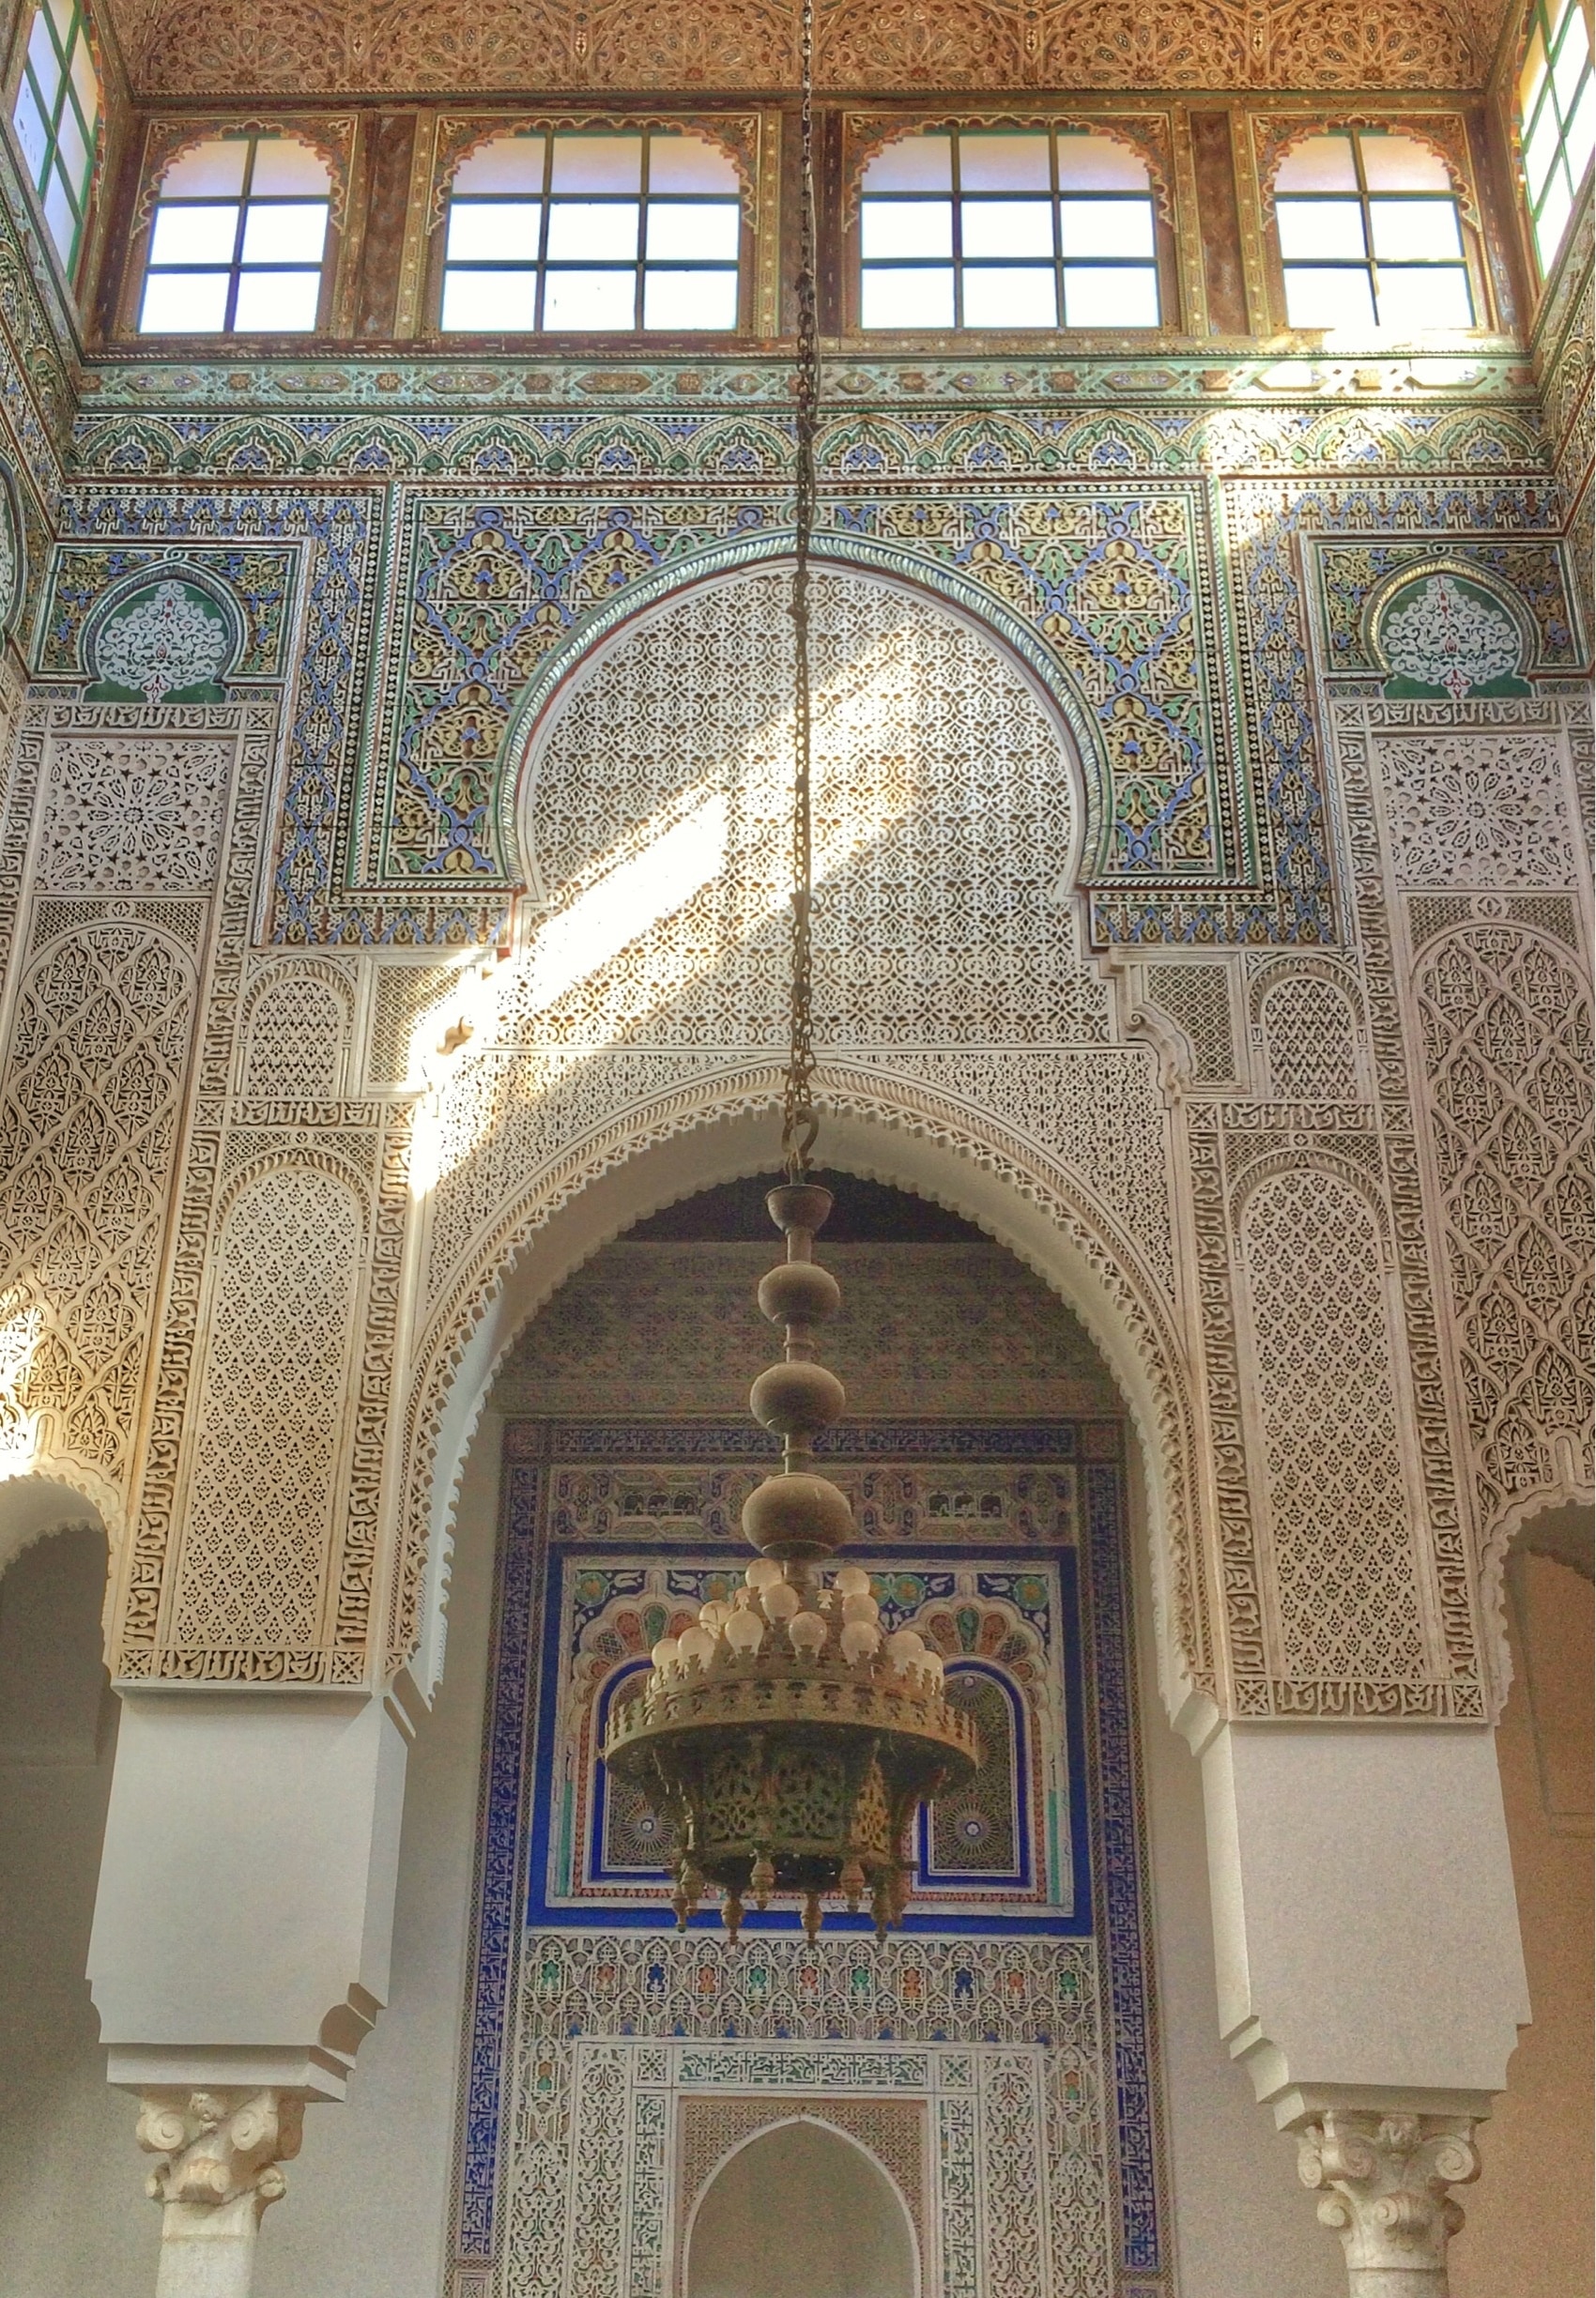 Amazing detail inside the Mausoleum of Moulay Ismail in Meknes which is open to non Muslims.  It is closed between 12-3 most days.  Try to avoid the tour groups which are especially thick in the afternoons.